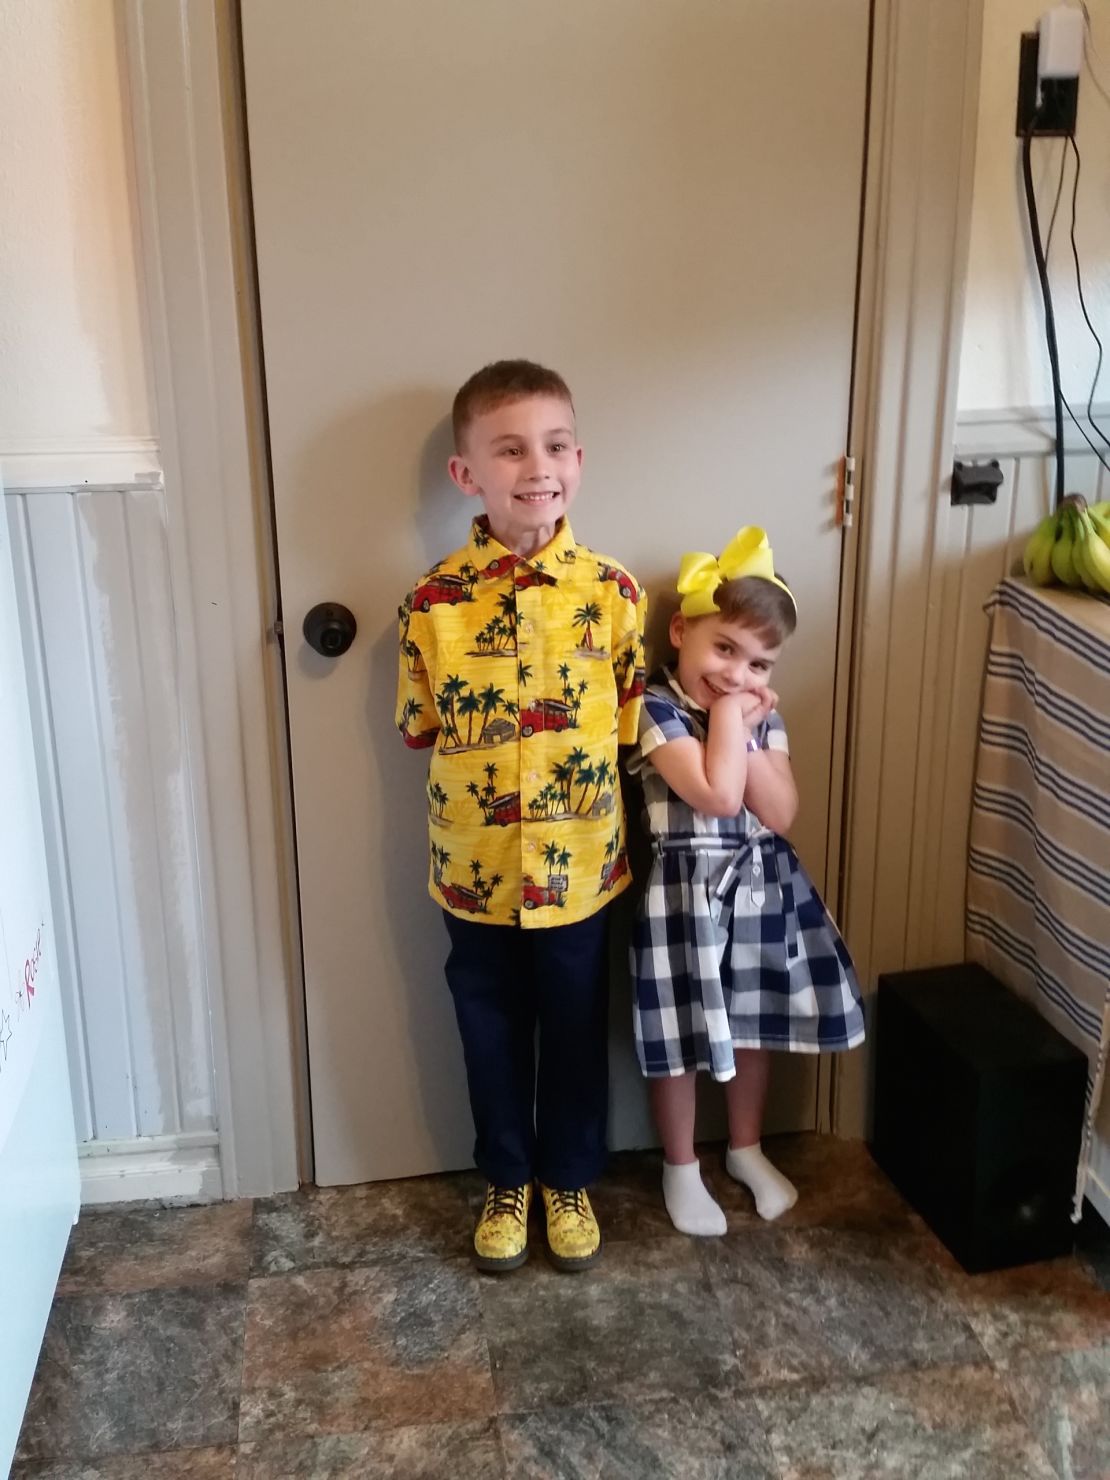 Silas, left, and Rosie, right, in 2017.